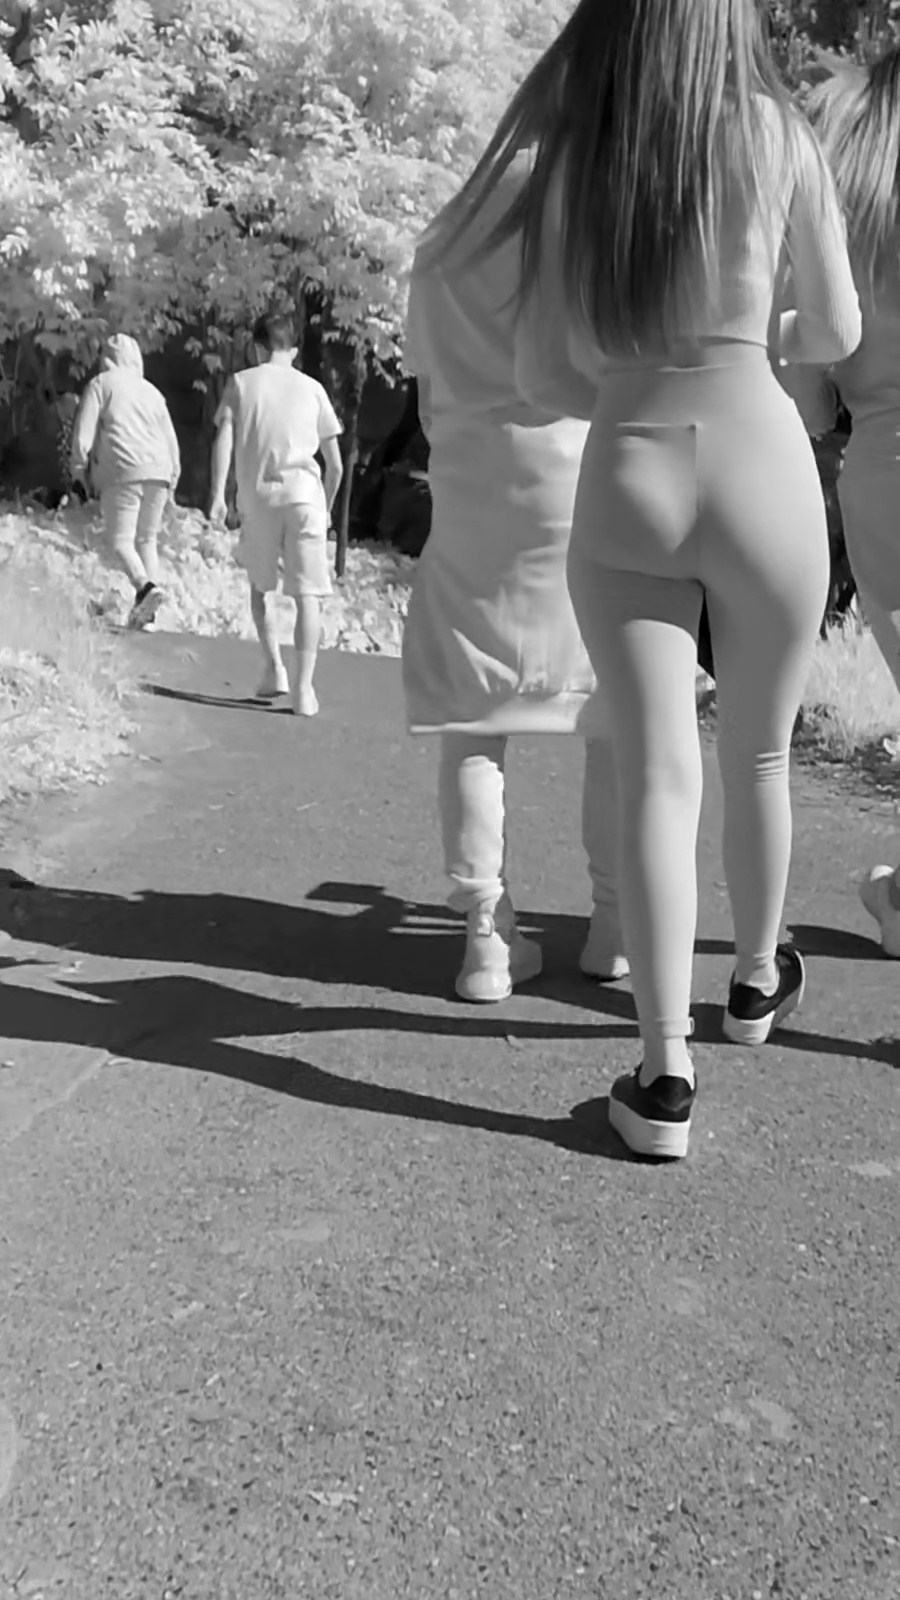 Cute Slim TEEN With BIG ASS In White Spandex With Visible Panty Lines - Candid Teens - Creepshots - Candid Voyeur Girls - Candid Ass Girls photo